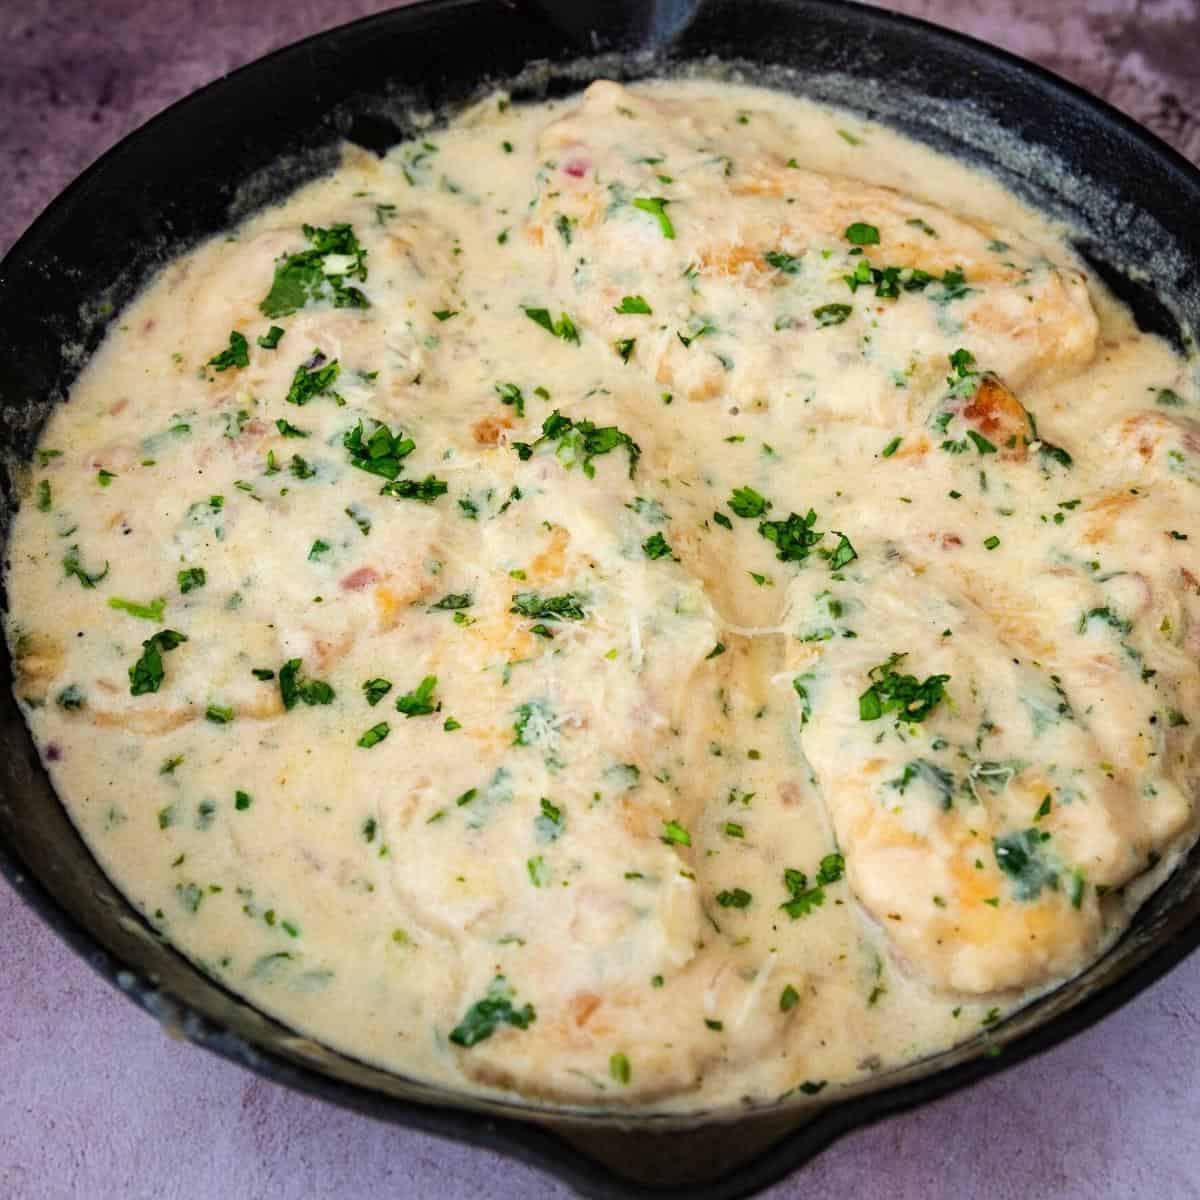 Skillet with seared chicken white sauce.